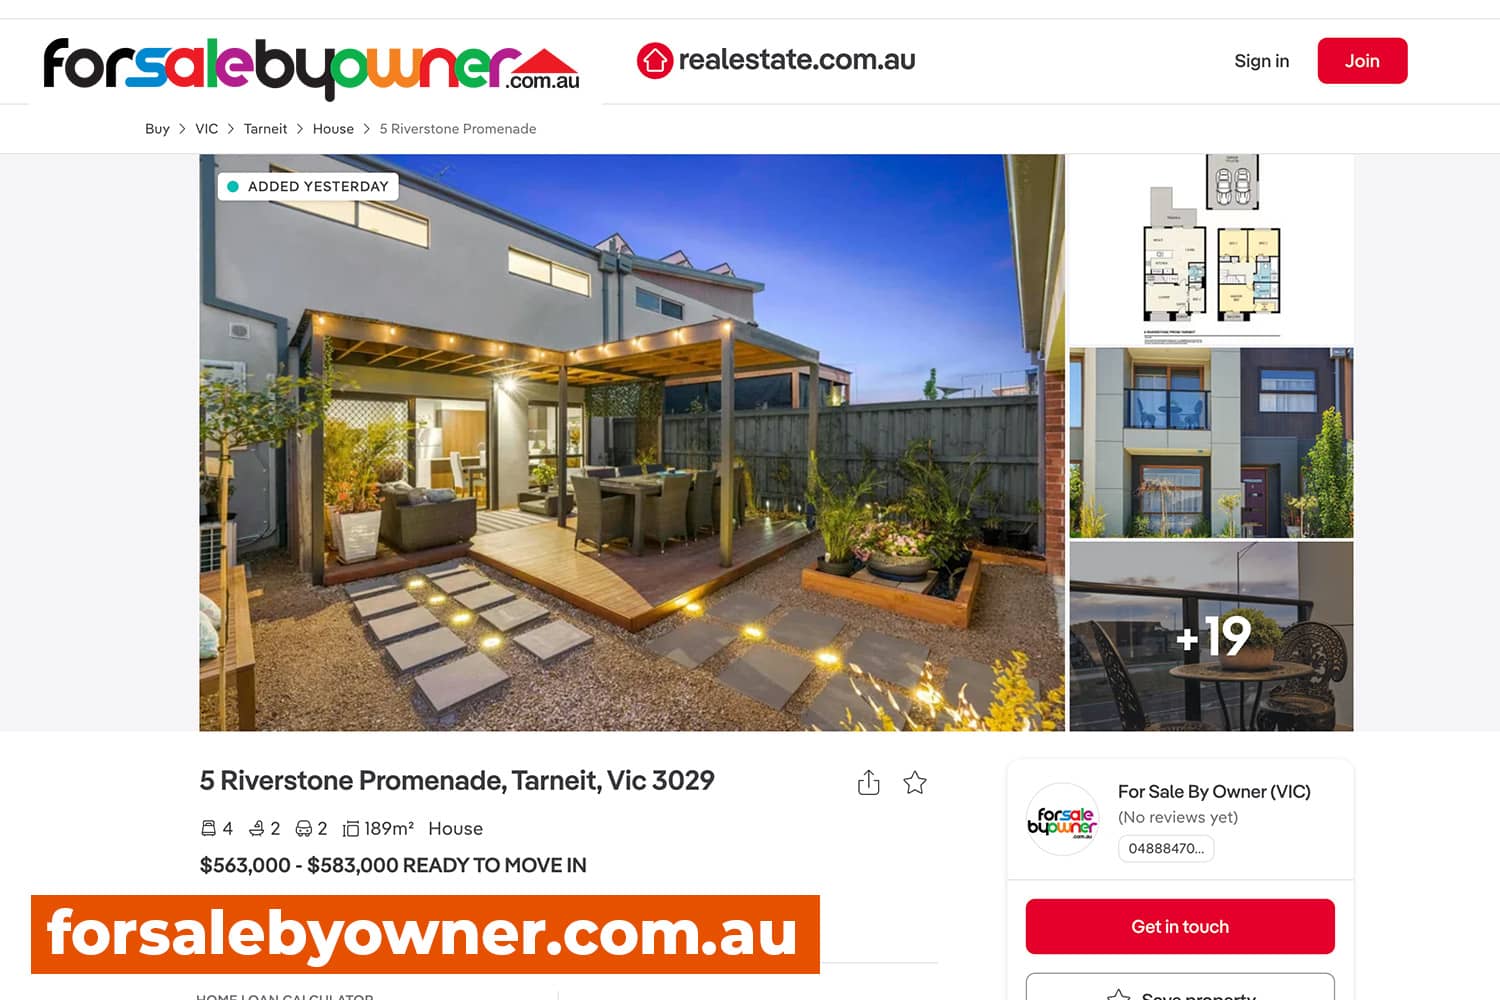 Advertise on Realestate.com.au Without an Agent